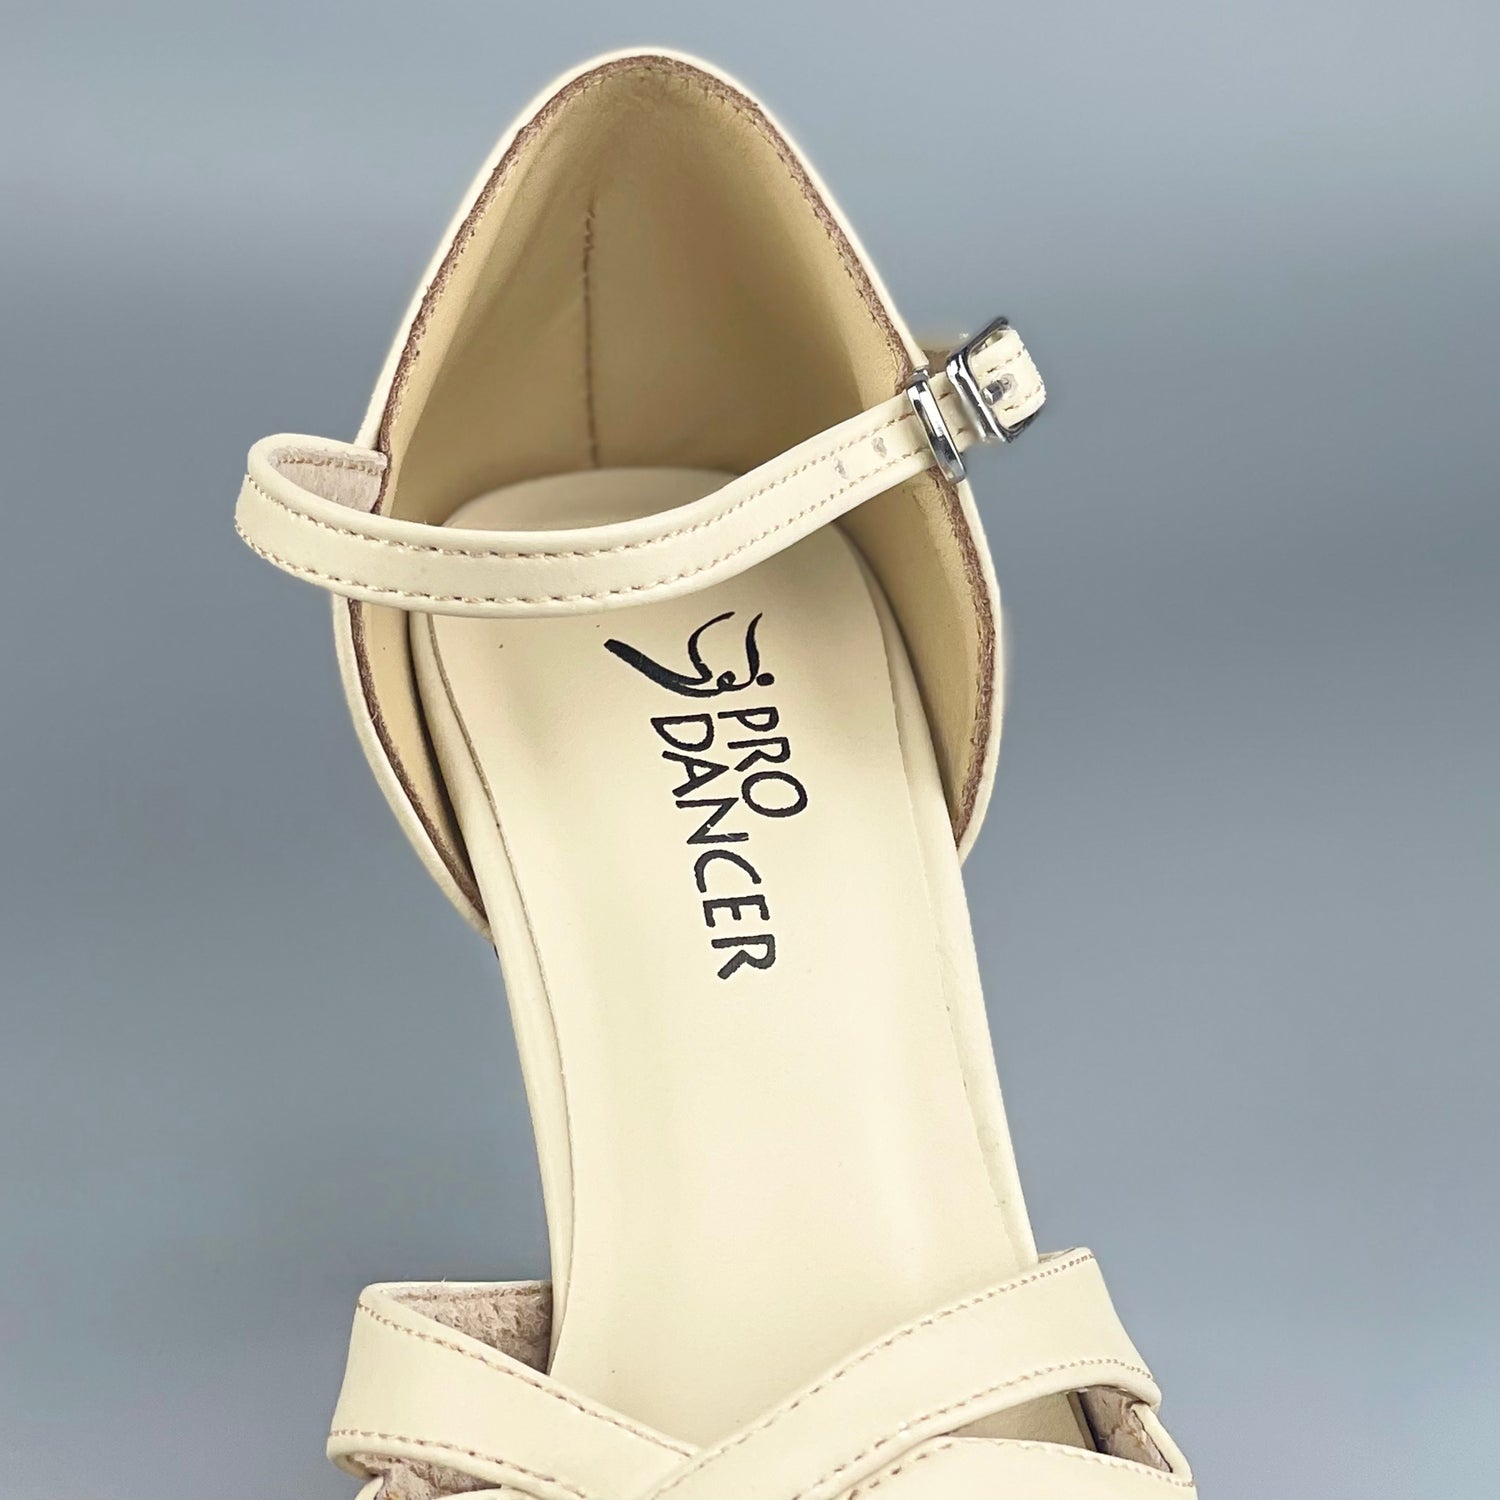 Pro Dancer Tango Argentino Shoes high heel dance sandals with leather sole in beige color (PD-9061A)0